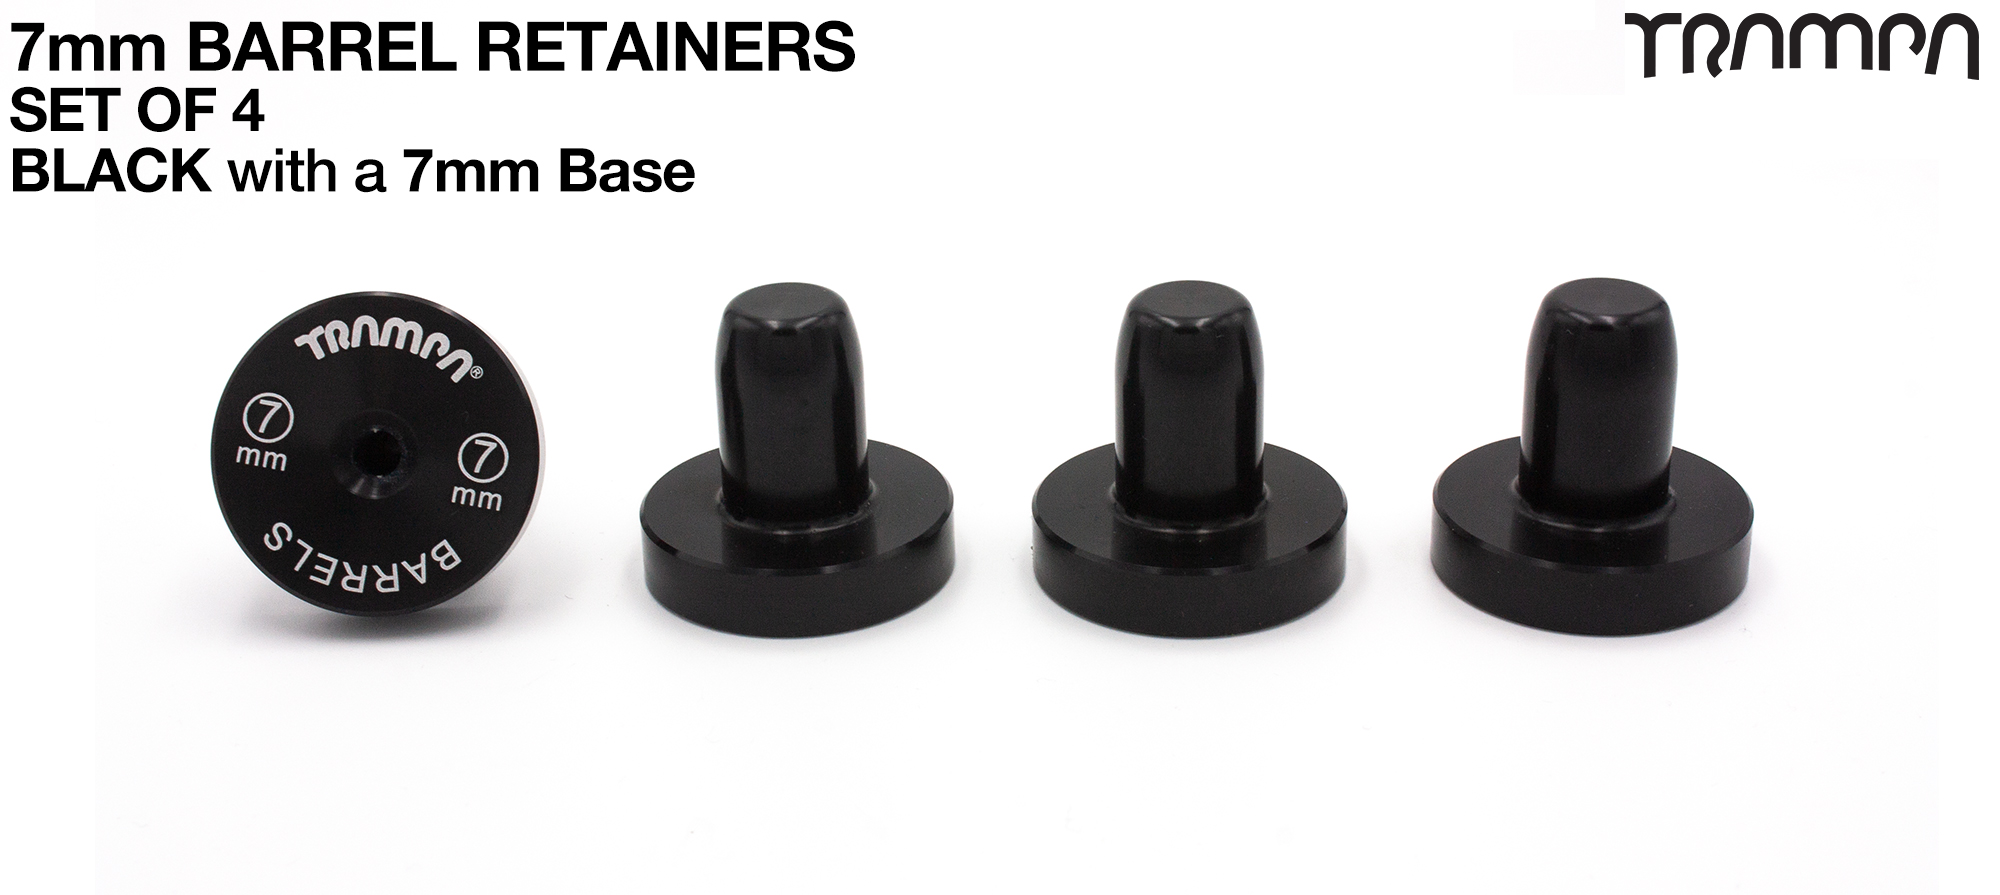 Barrel Retainers x4 with 7mm Base